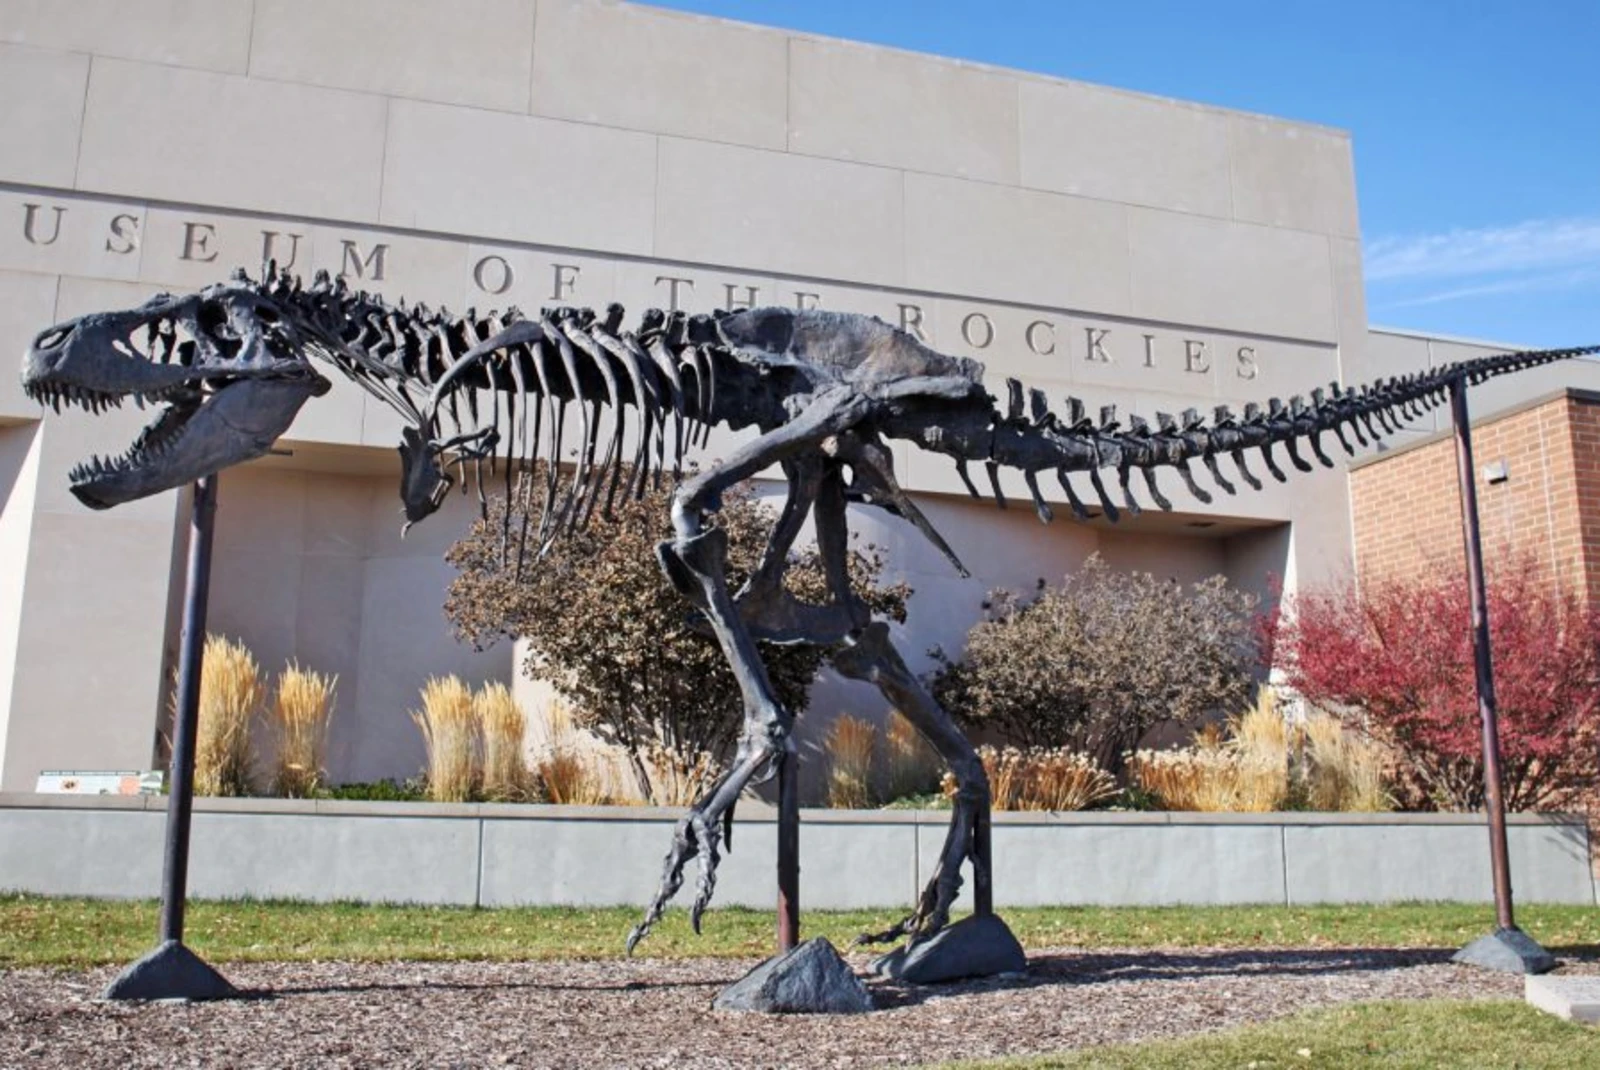 Museum of the Rockies is an enriching journey through natural history and cultural heritage, showcasing captivating exhibits in Bozeman, Montana.